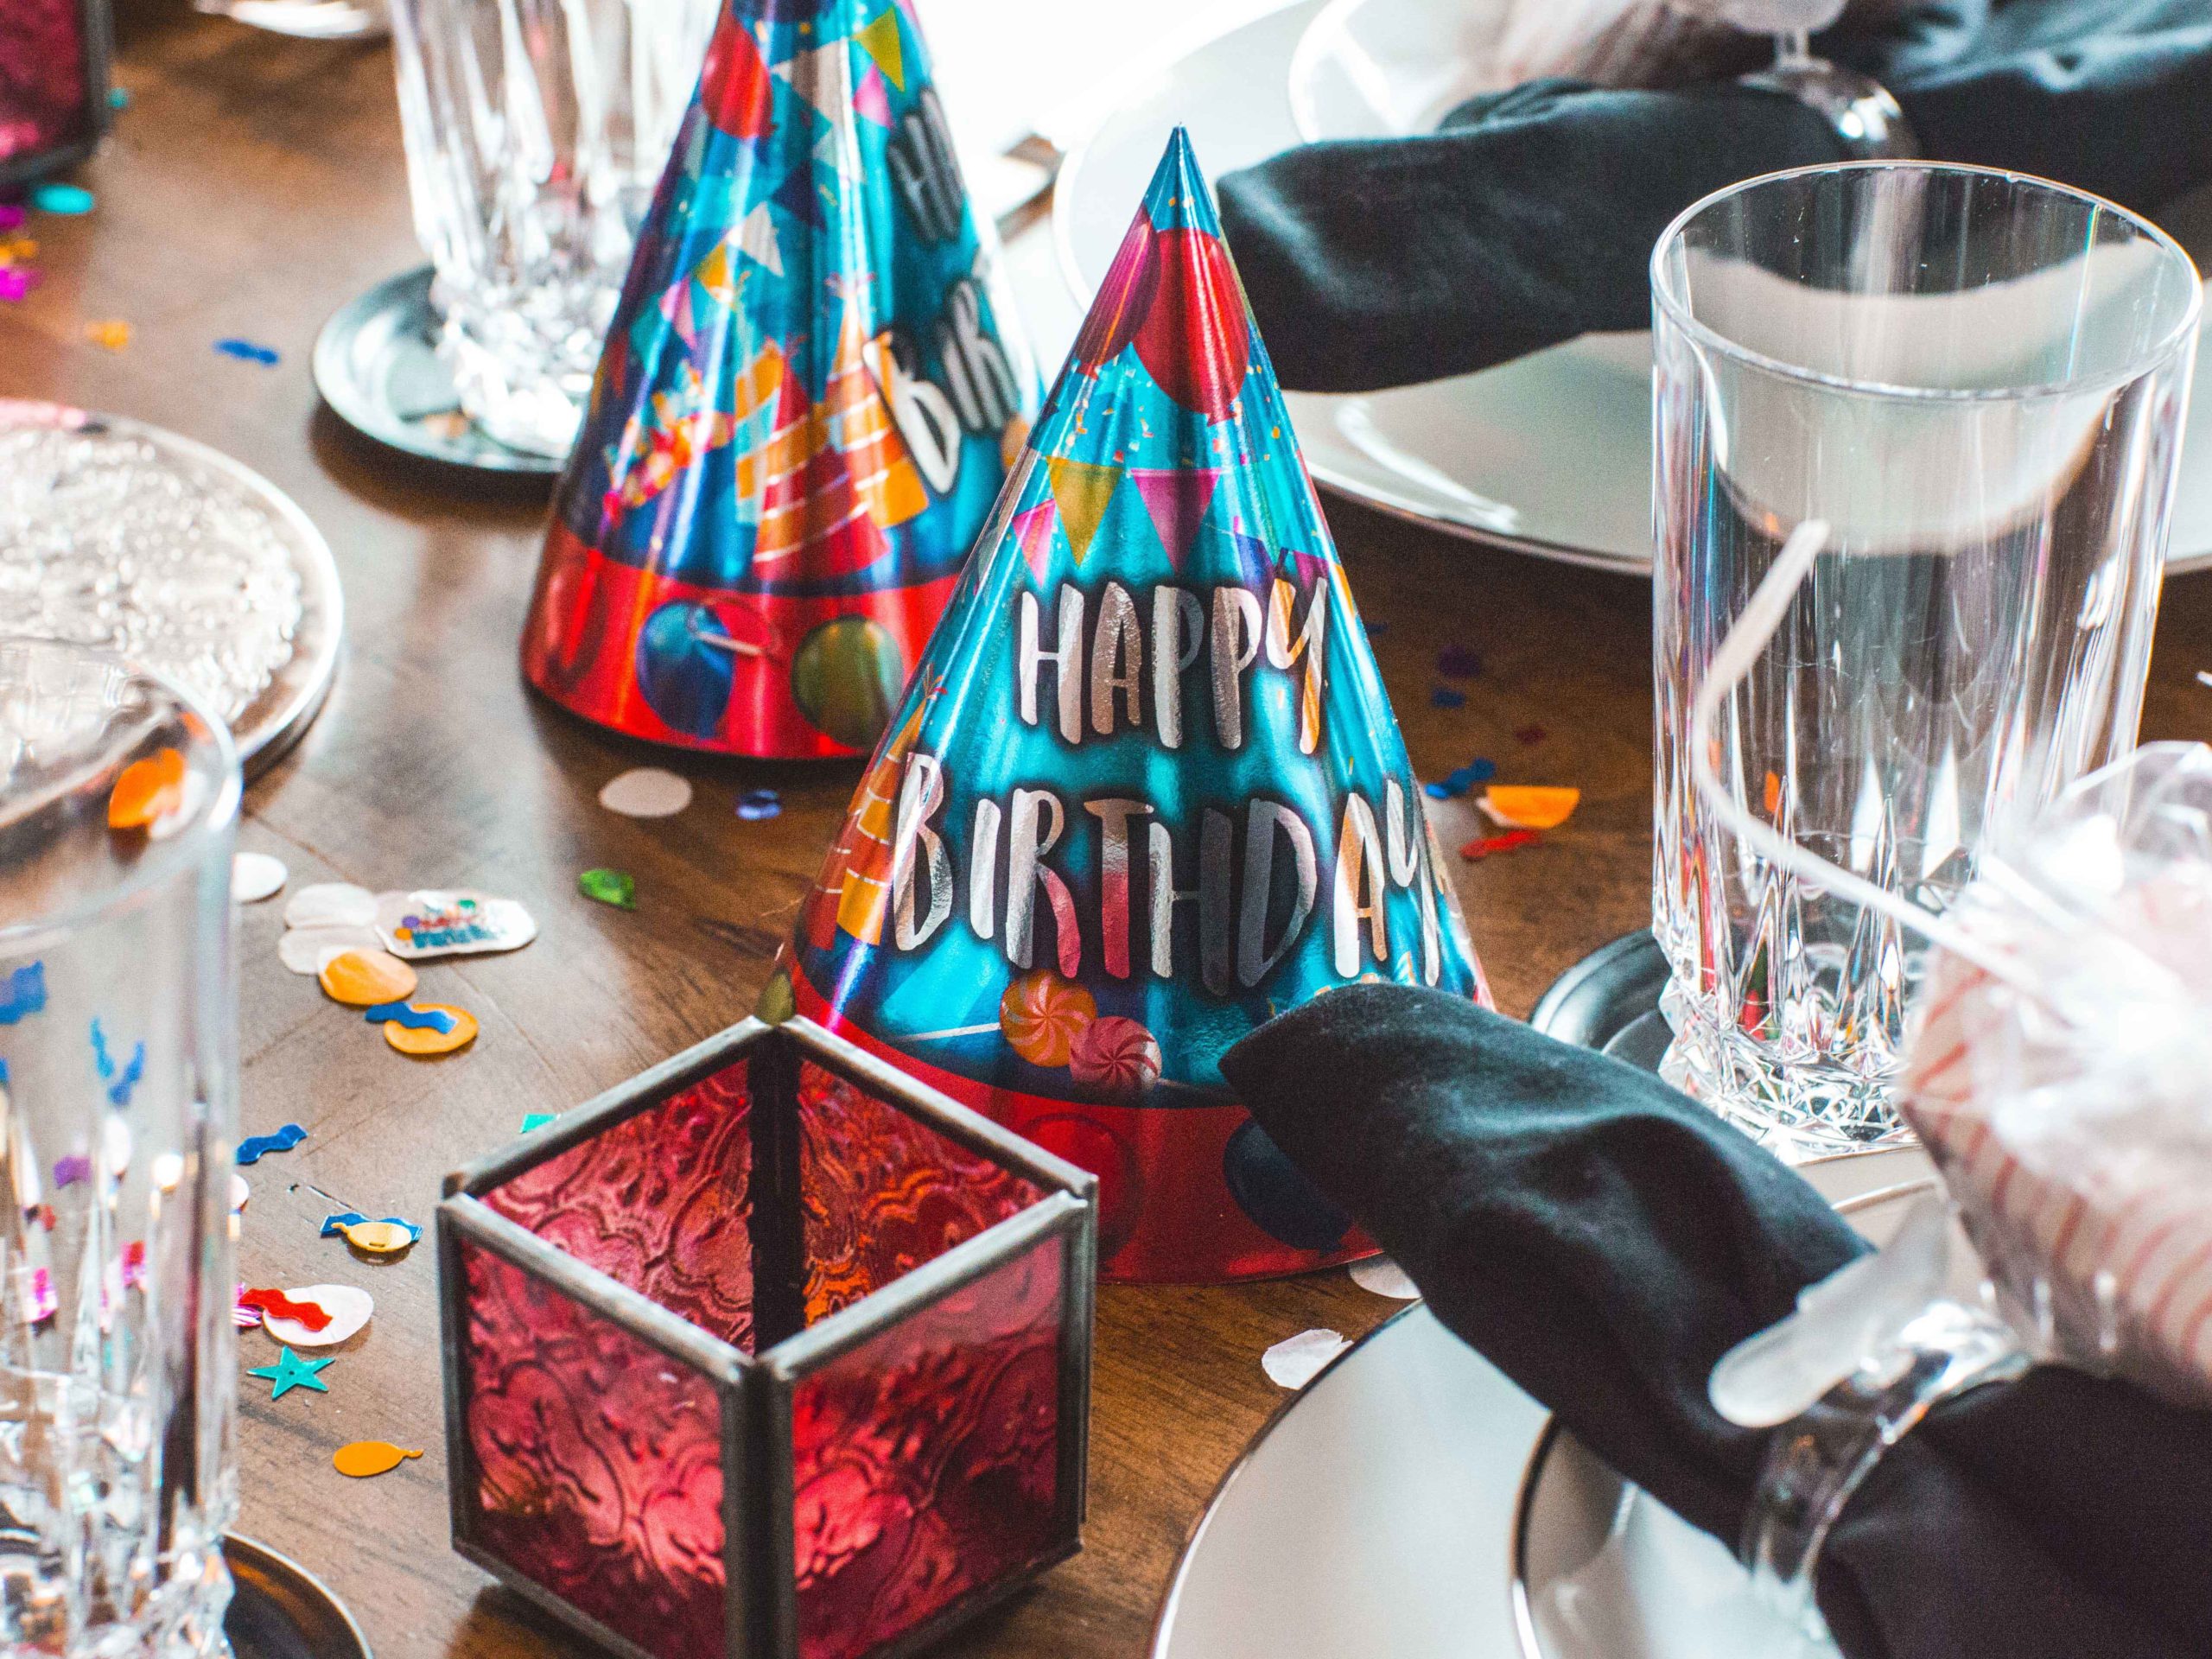 Table with birthday hats